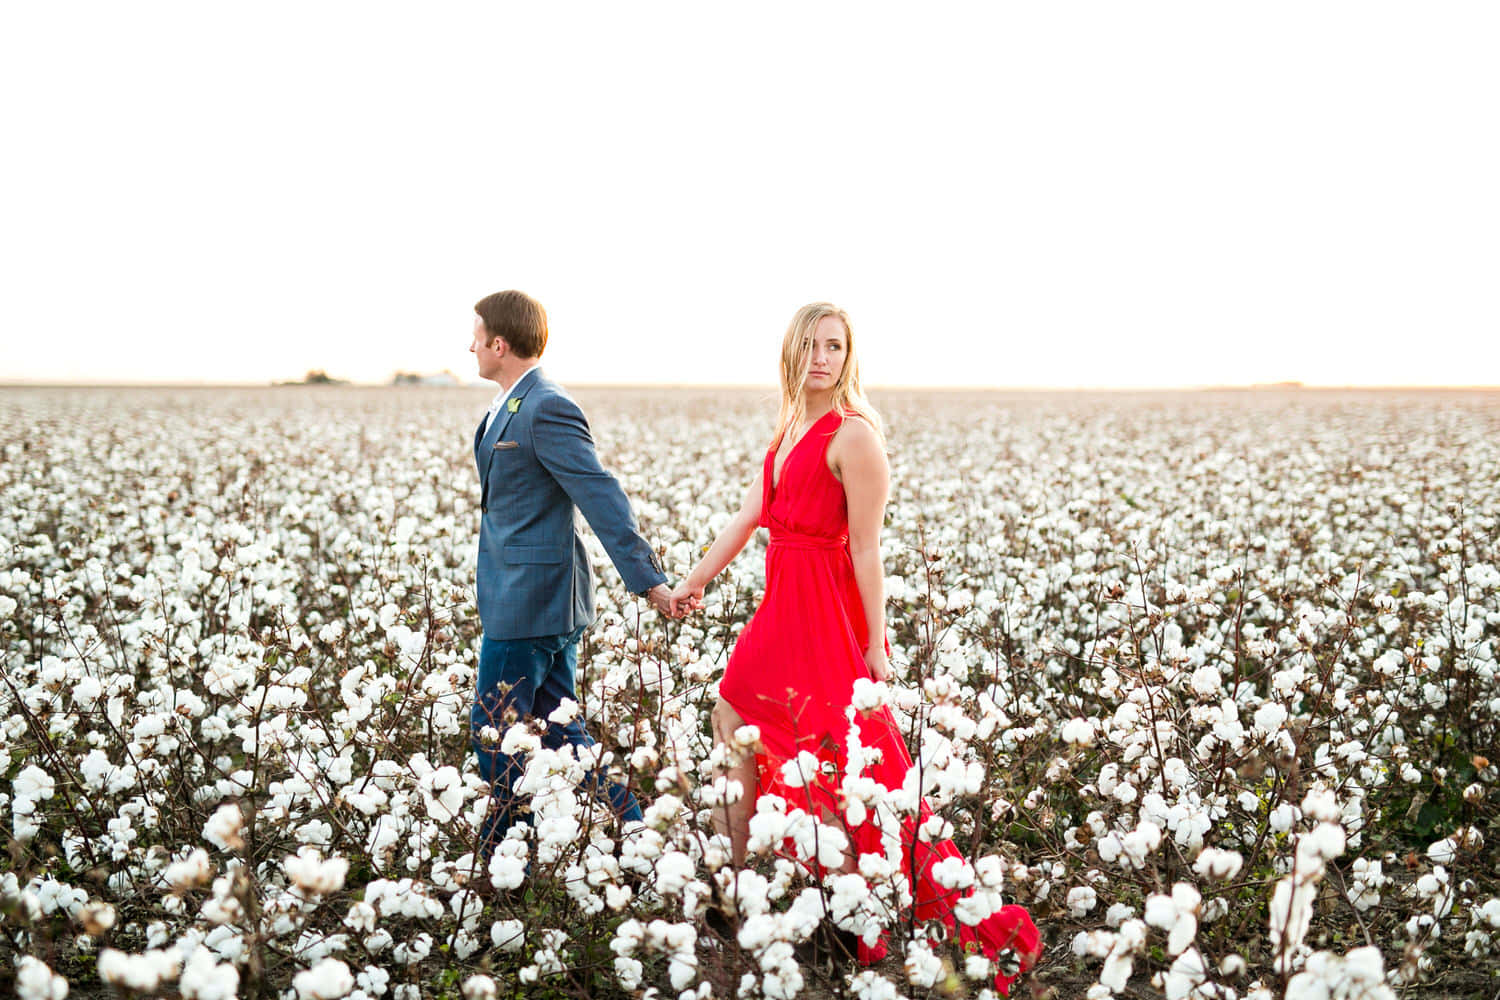 A Couple In A Red Dress Walking Through A Cotton Field